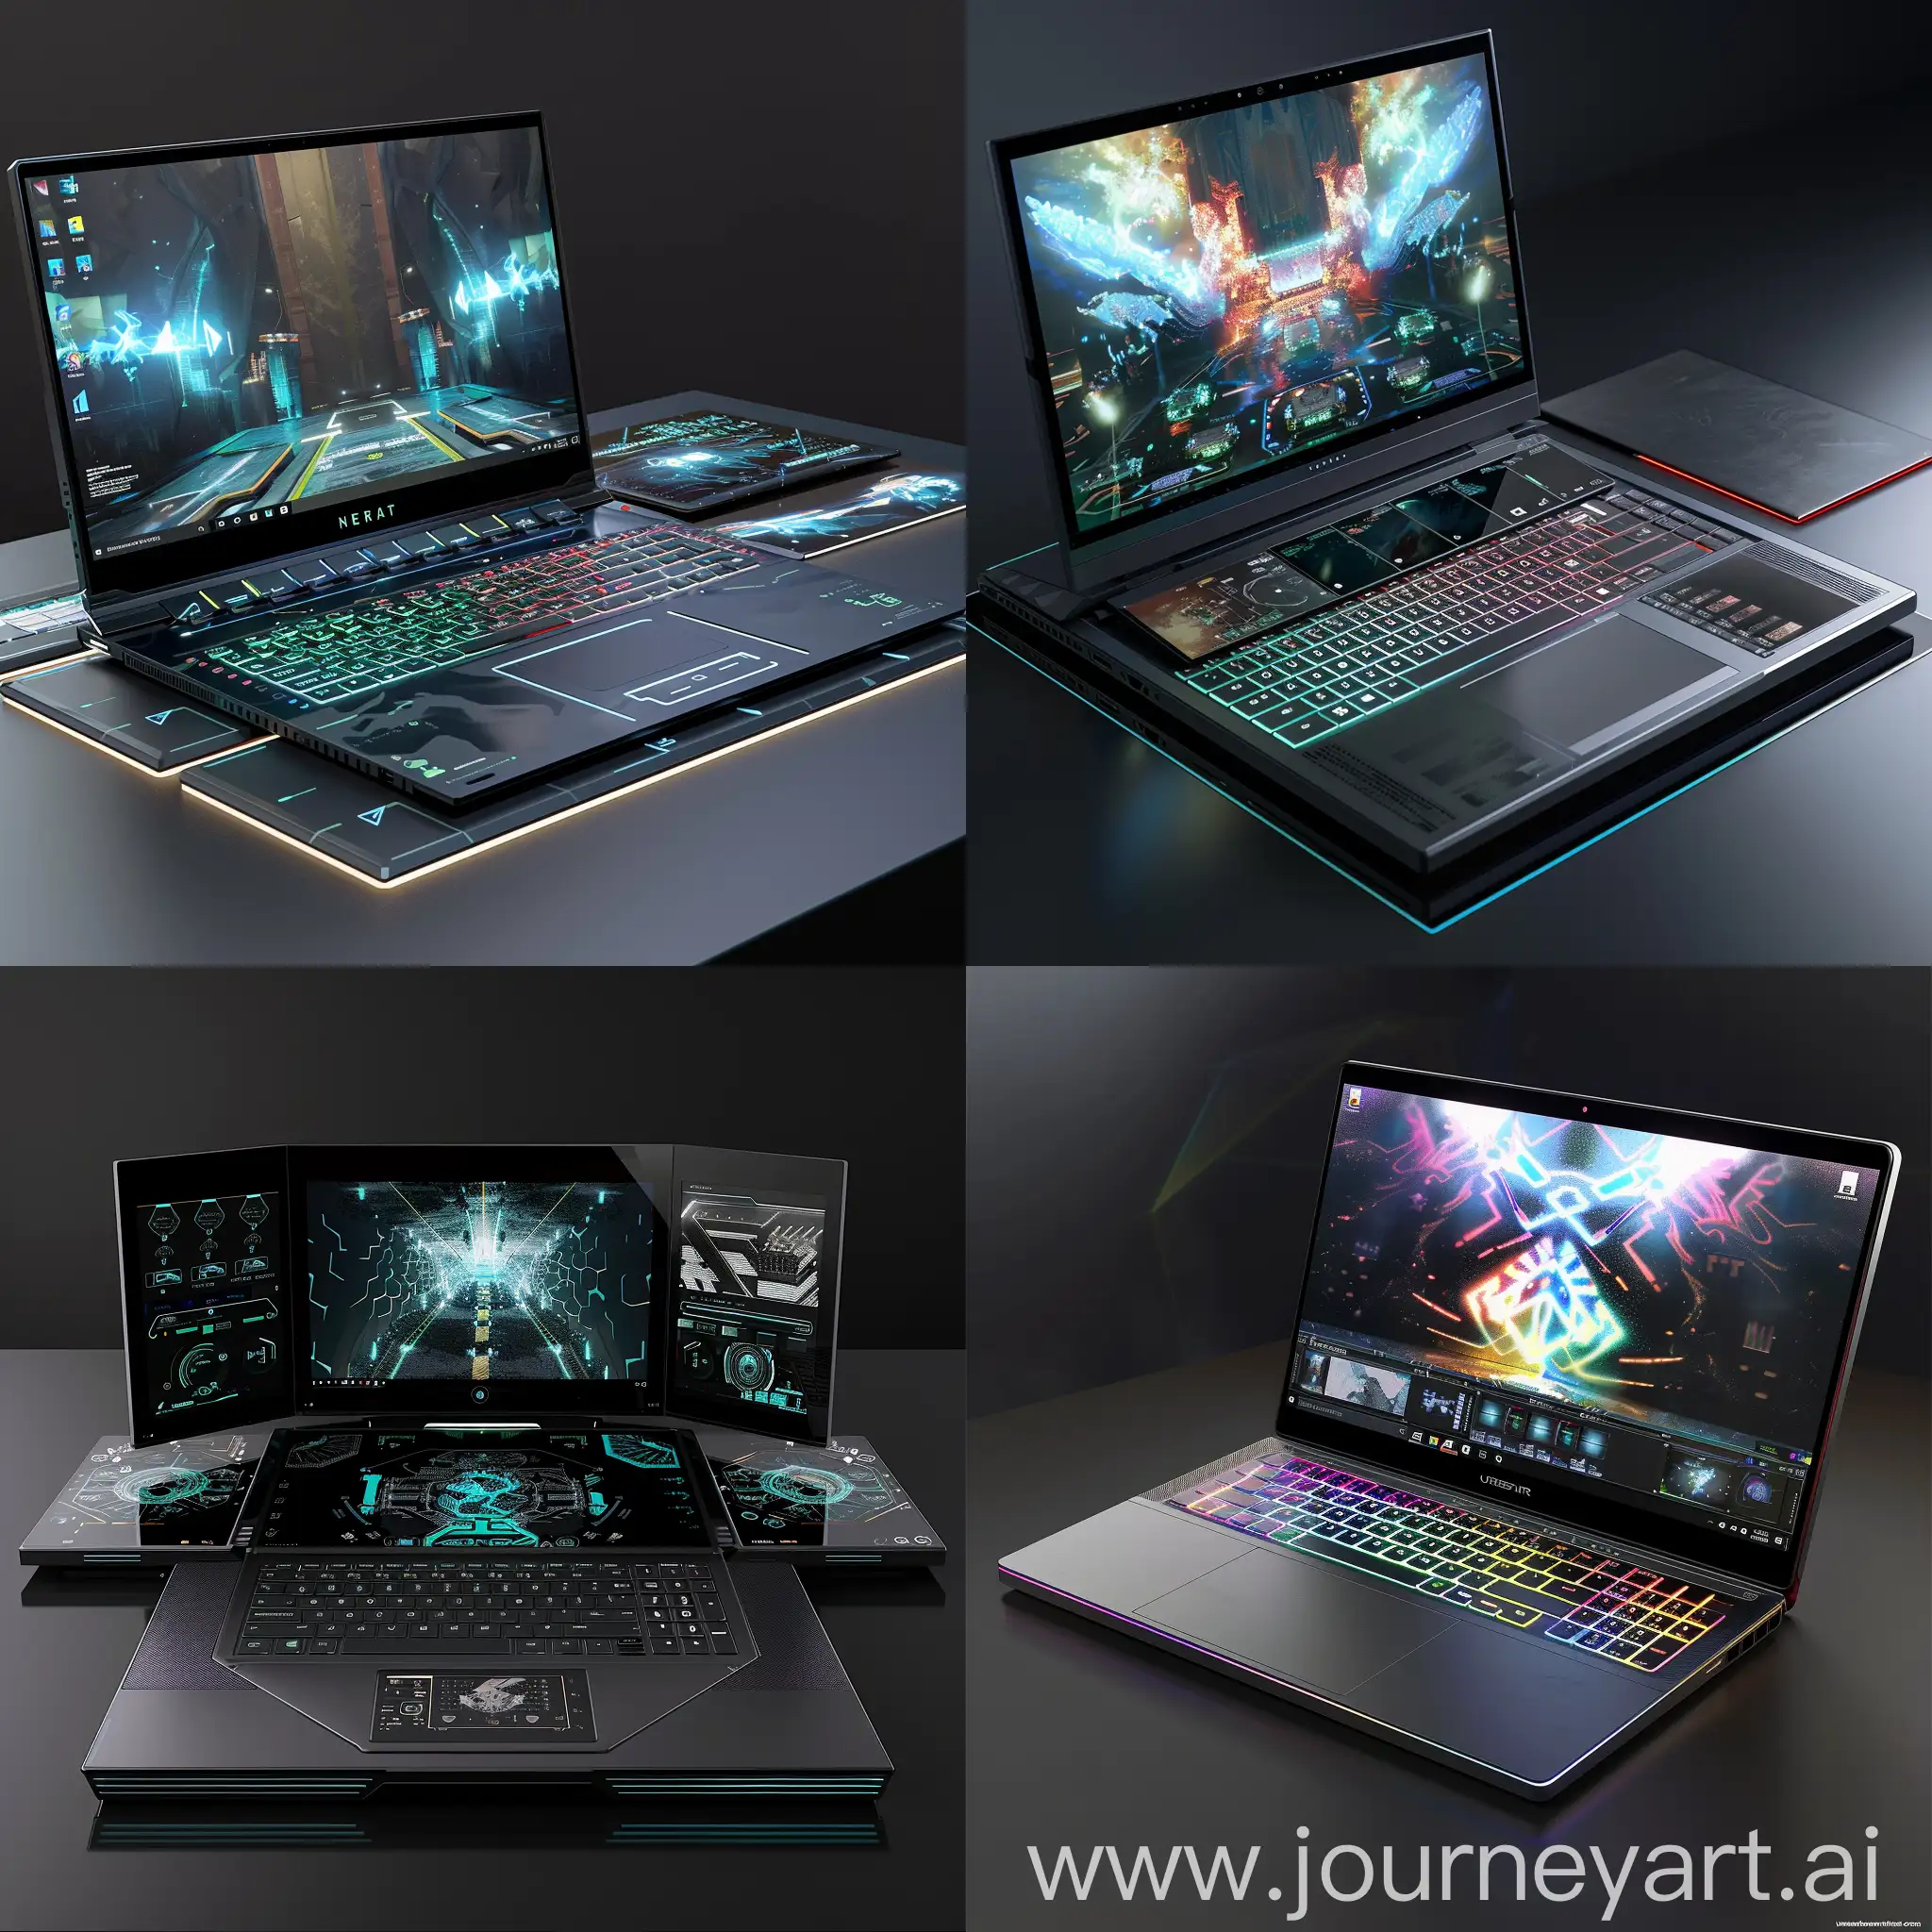 Futuristic-DualScreen-Laptop-with-AIPowered-Features